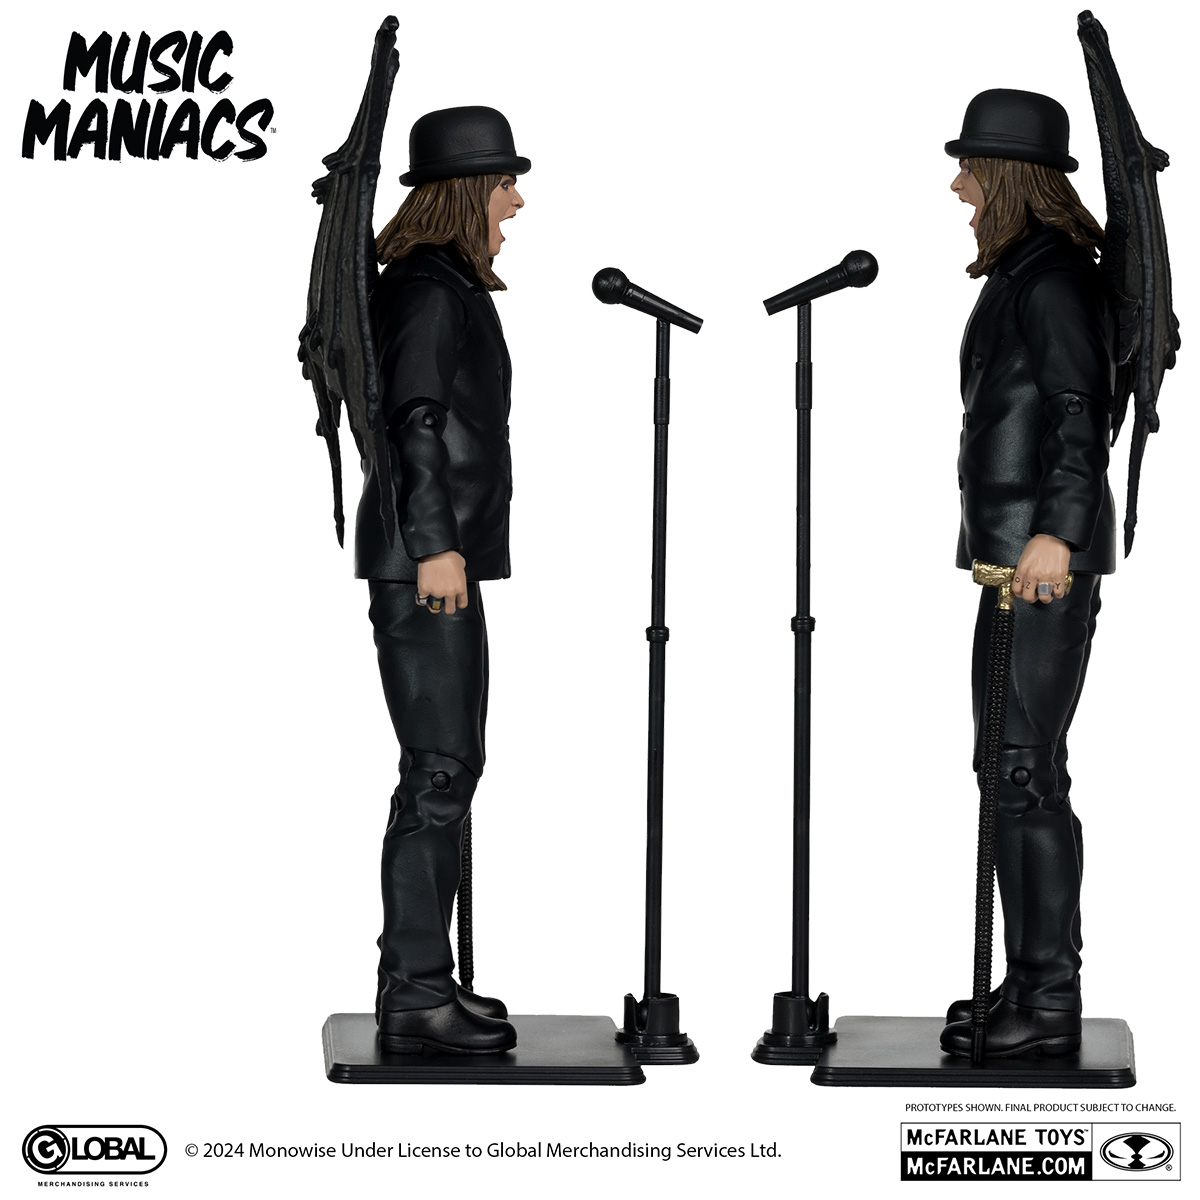 Ozzy Osbourne Music Maniacs Metal Wave 1 6-Inch Scale Action Figure